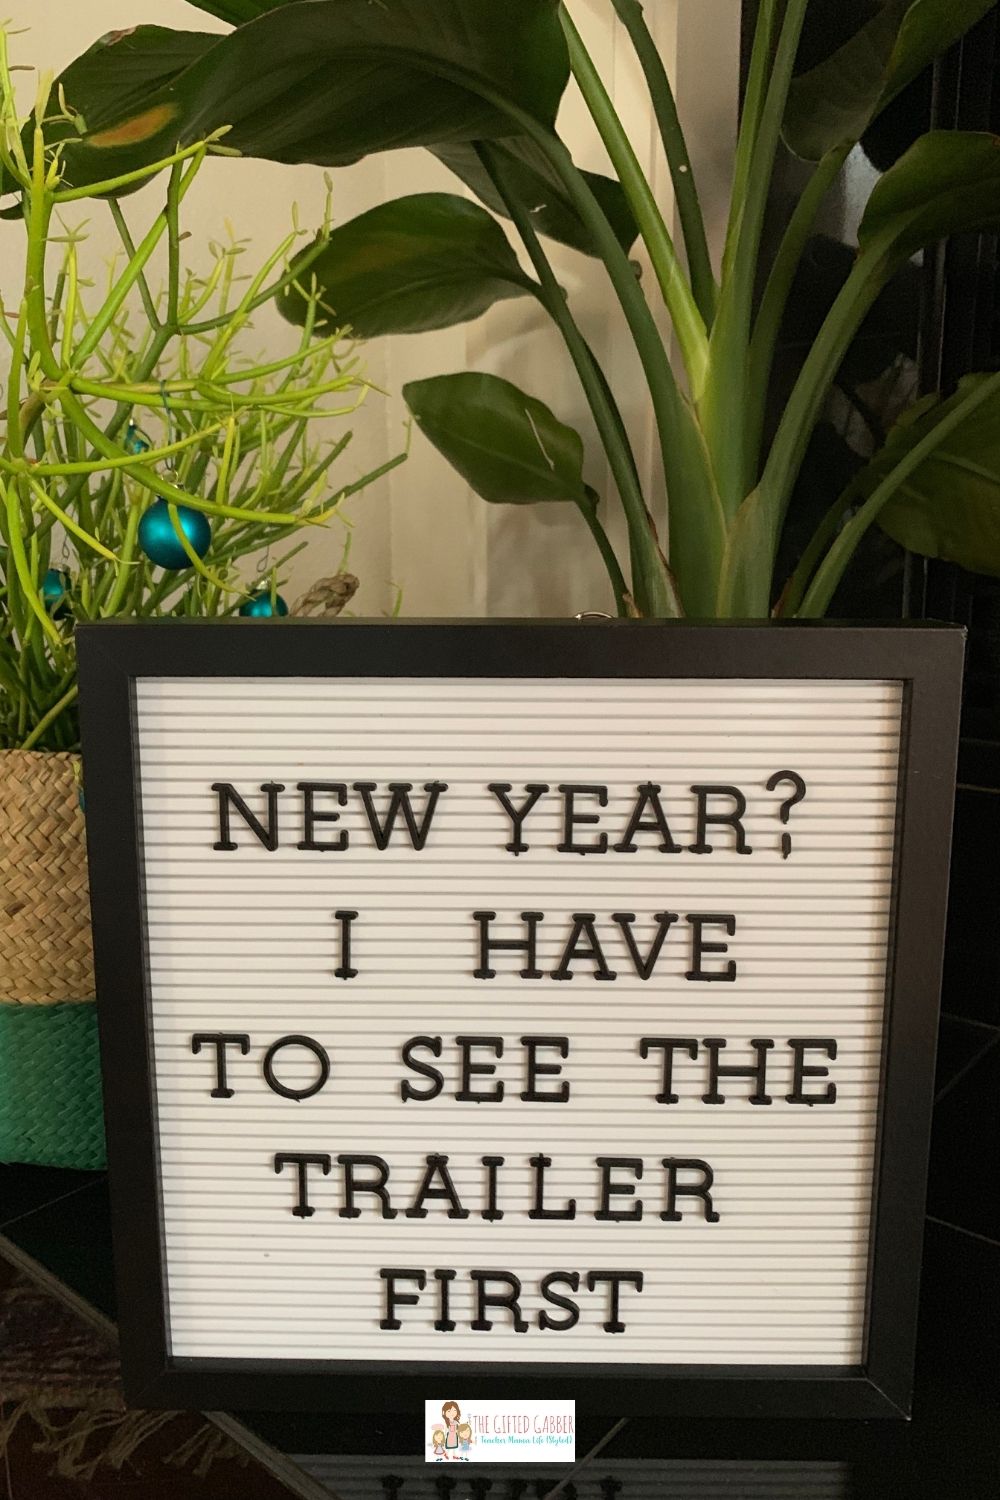 New Year Letter Board Quotes for Celebrations - The Gifted Gabber